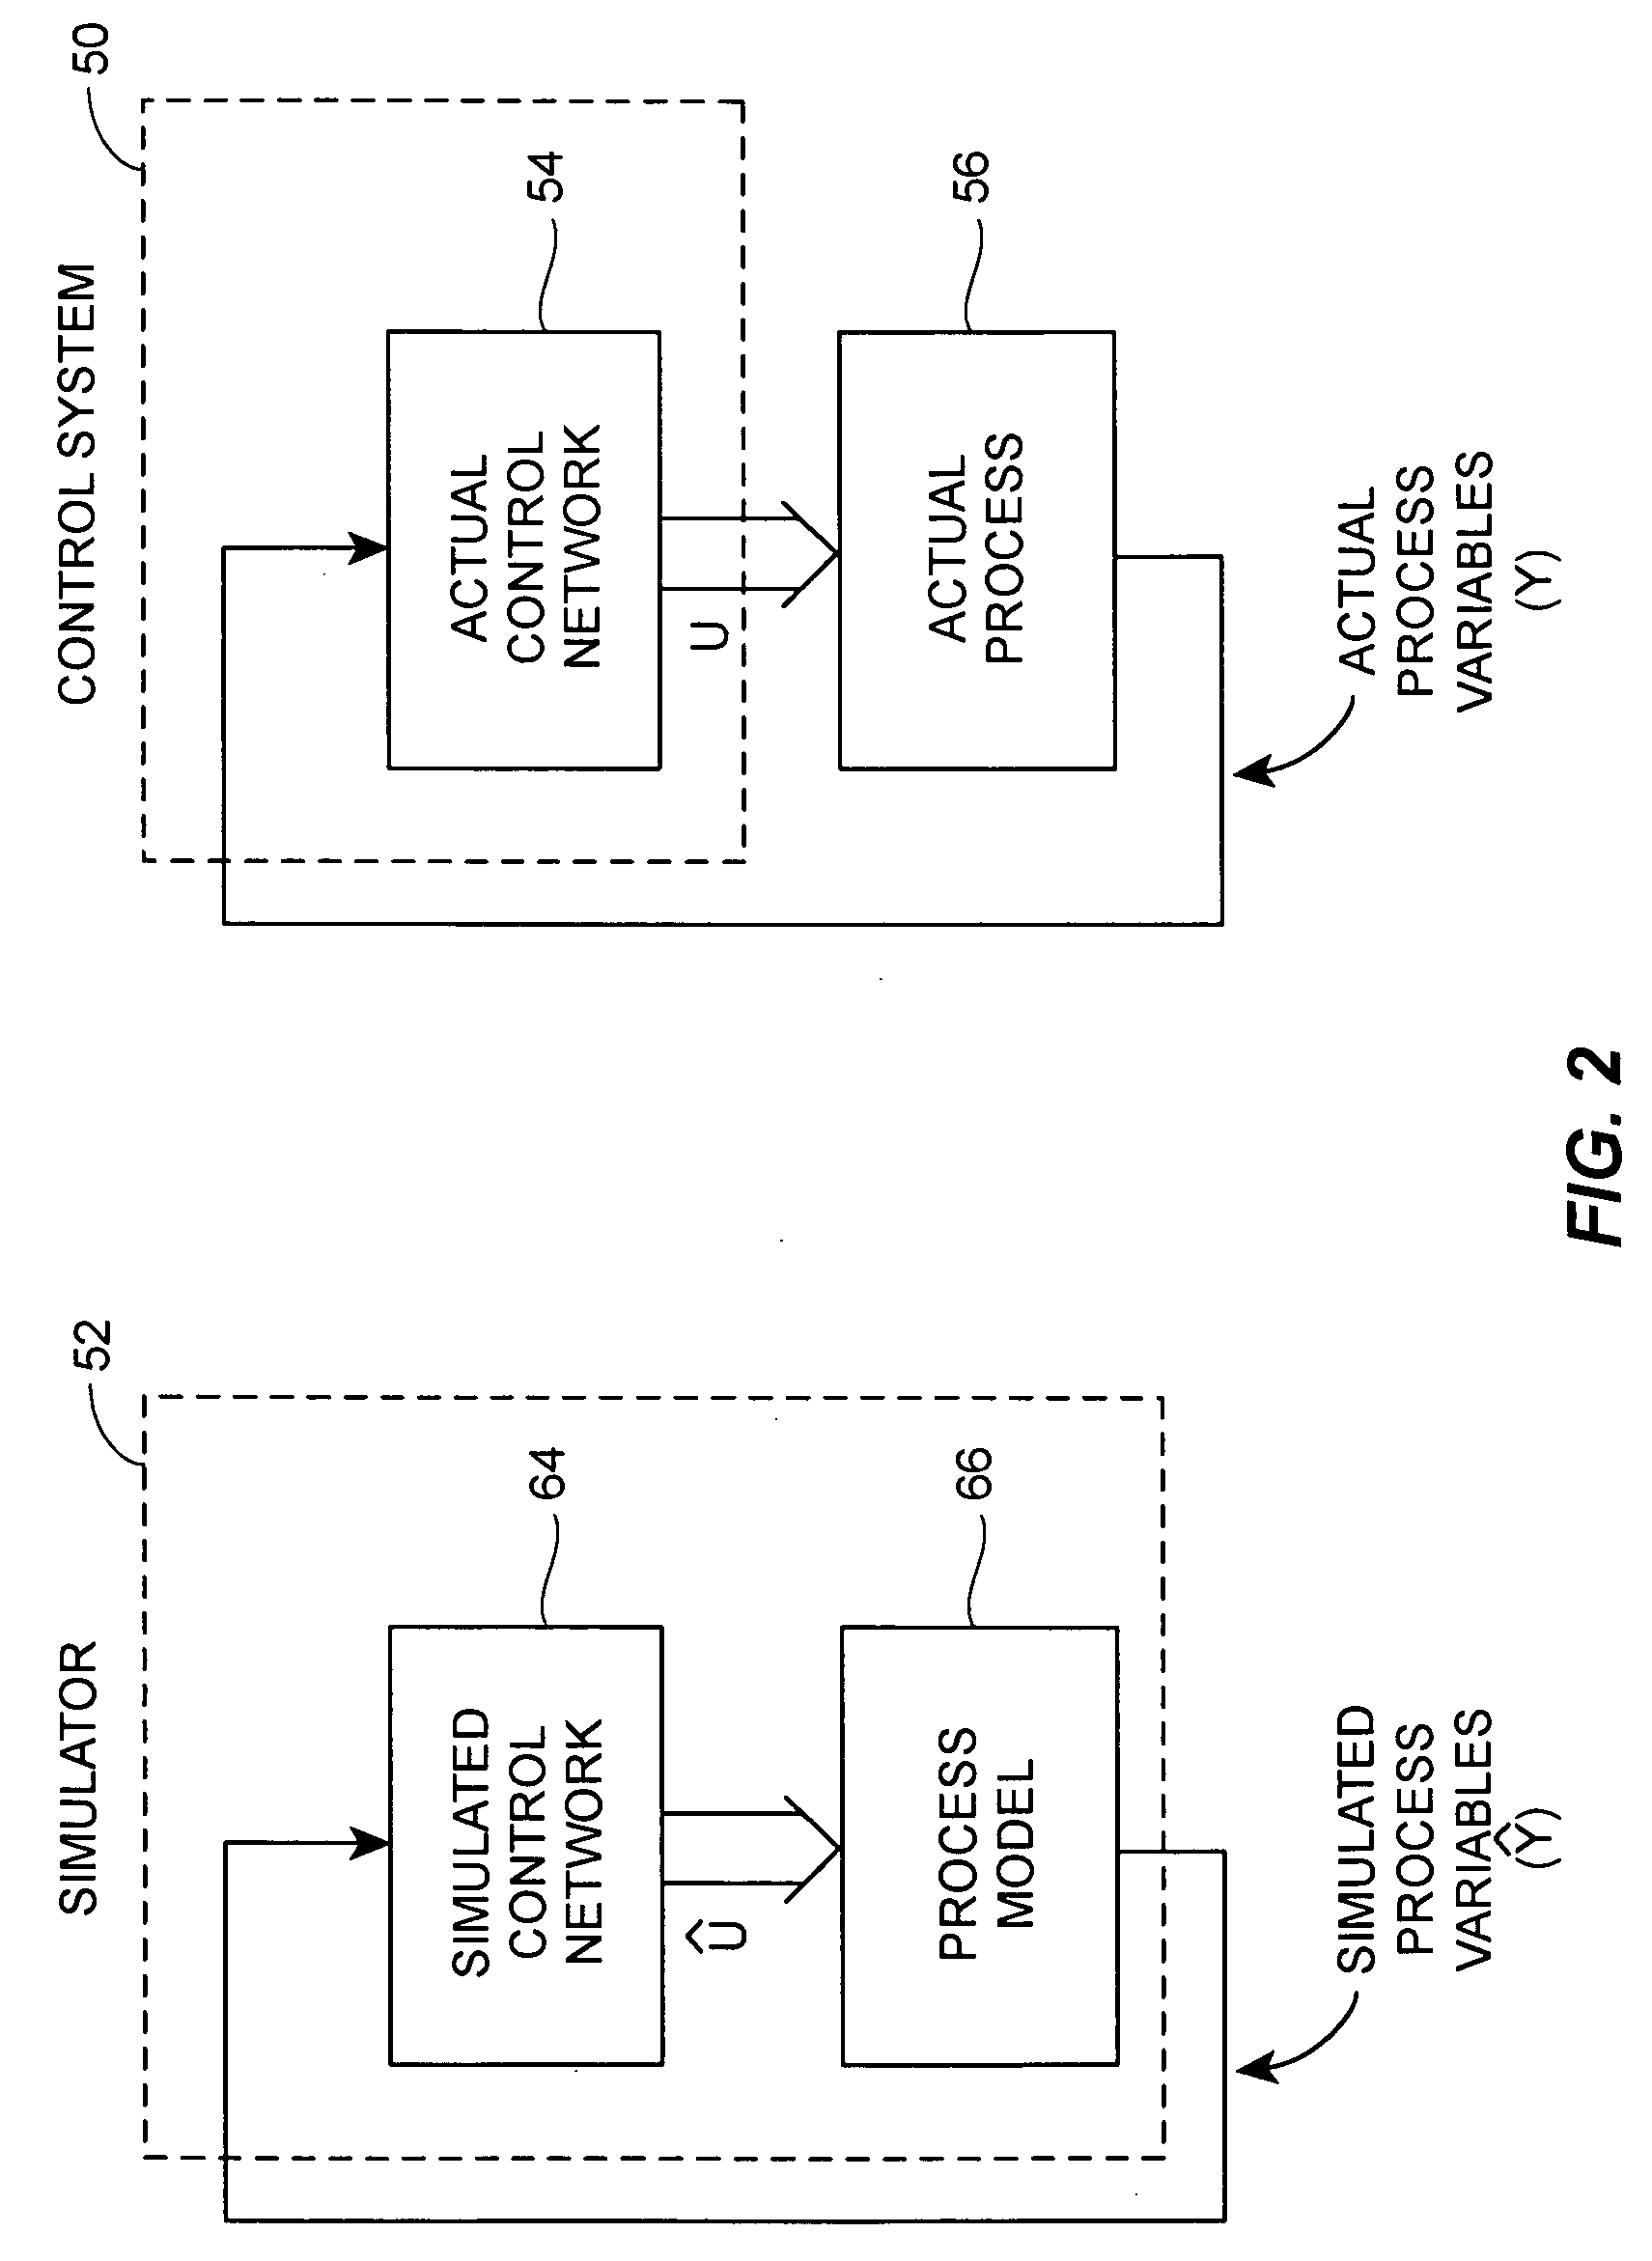 Real-time synchronized control and simulation within a process plant